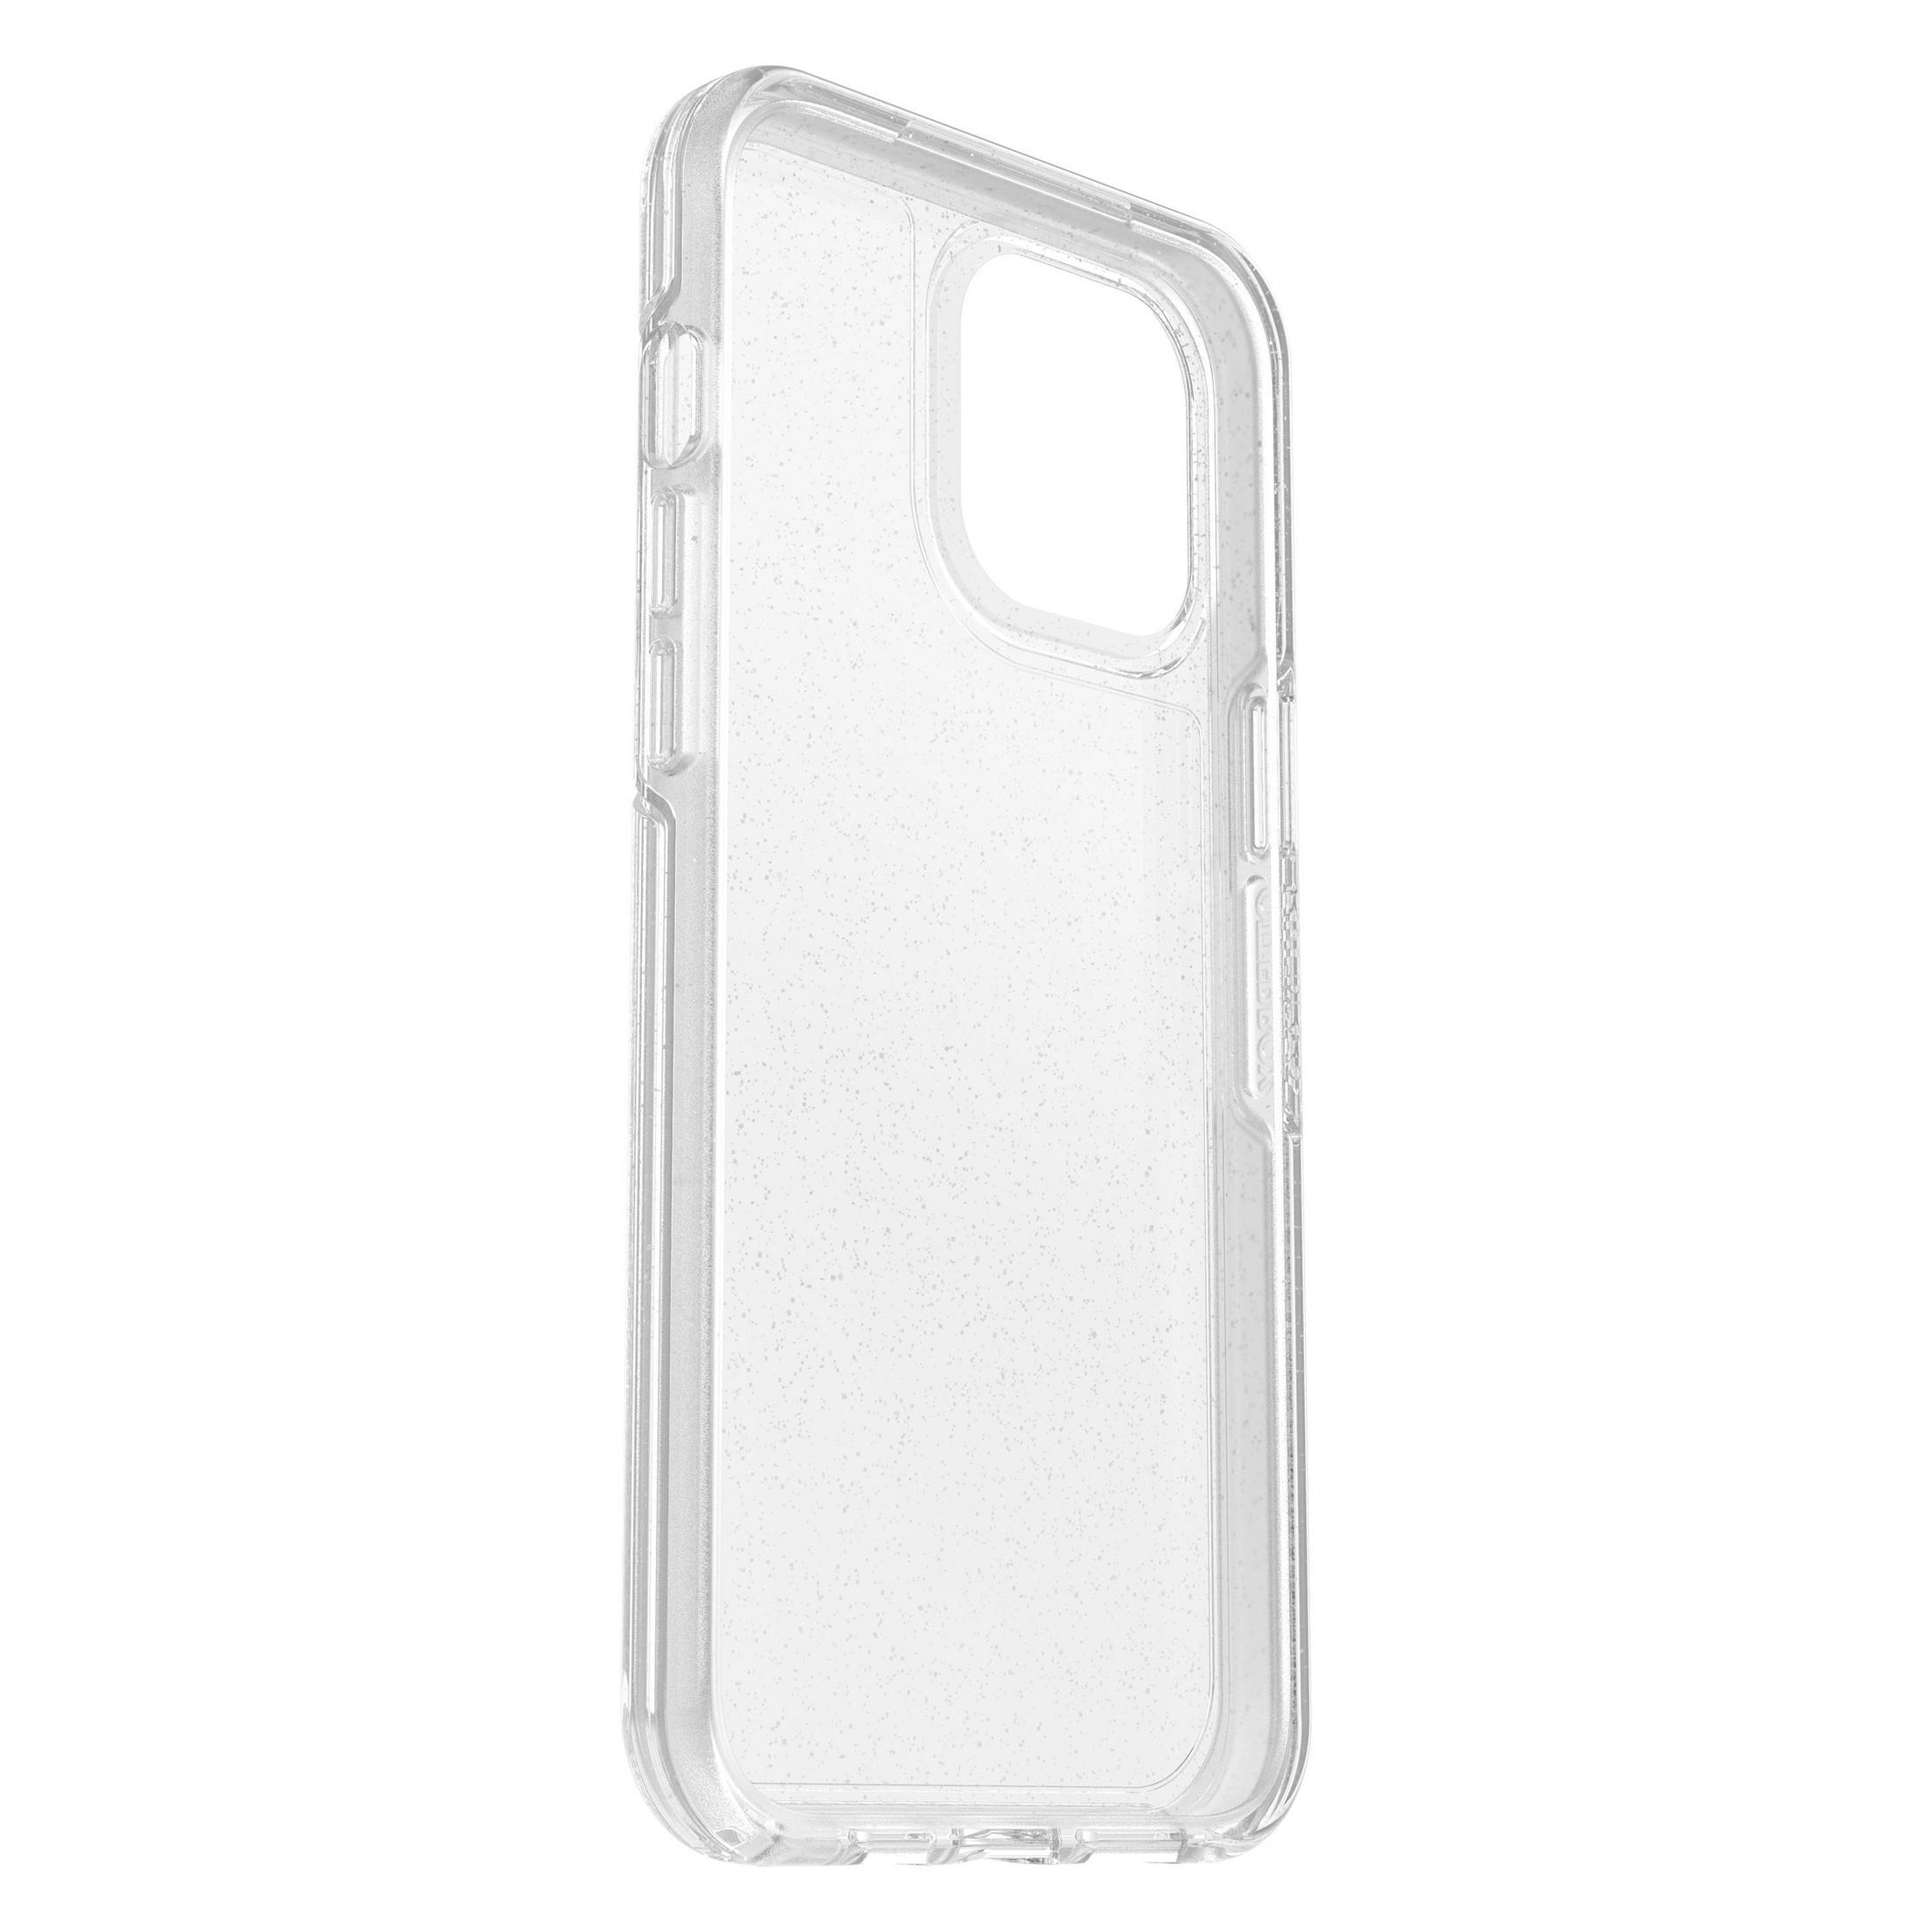 CLEAR Transparent/Glitzer iPhone STARDUST 12 IP MAX SYMMETRY Backcover, PRO CL., OTTERBOX 12 Pro 77-65471 Apple, Max,